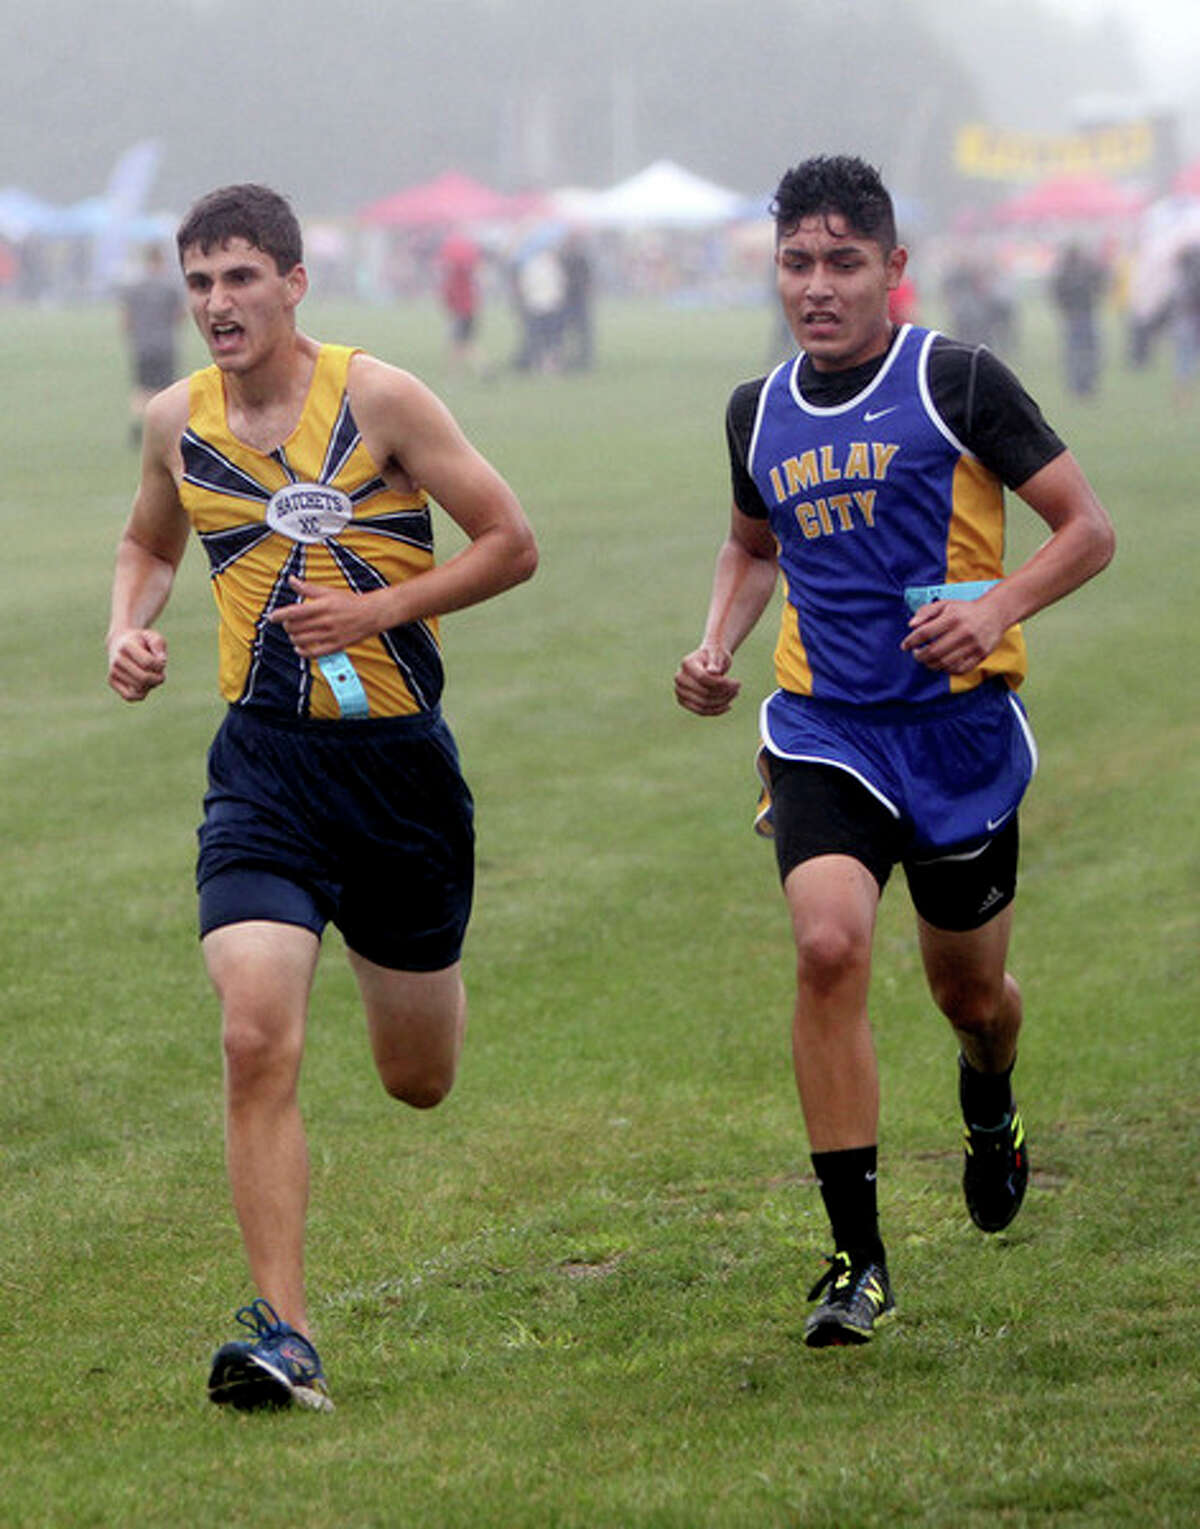 Bad Axe's Kendal Delpiere is side by side with Imlay City's Raul Rodriguez.